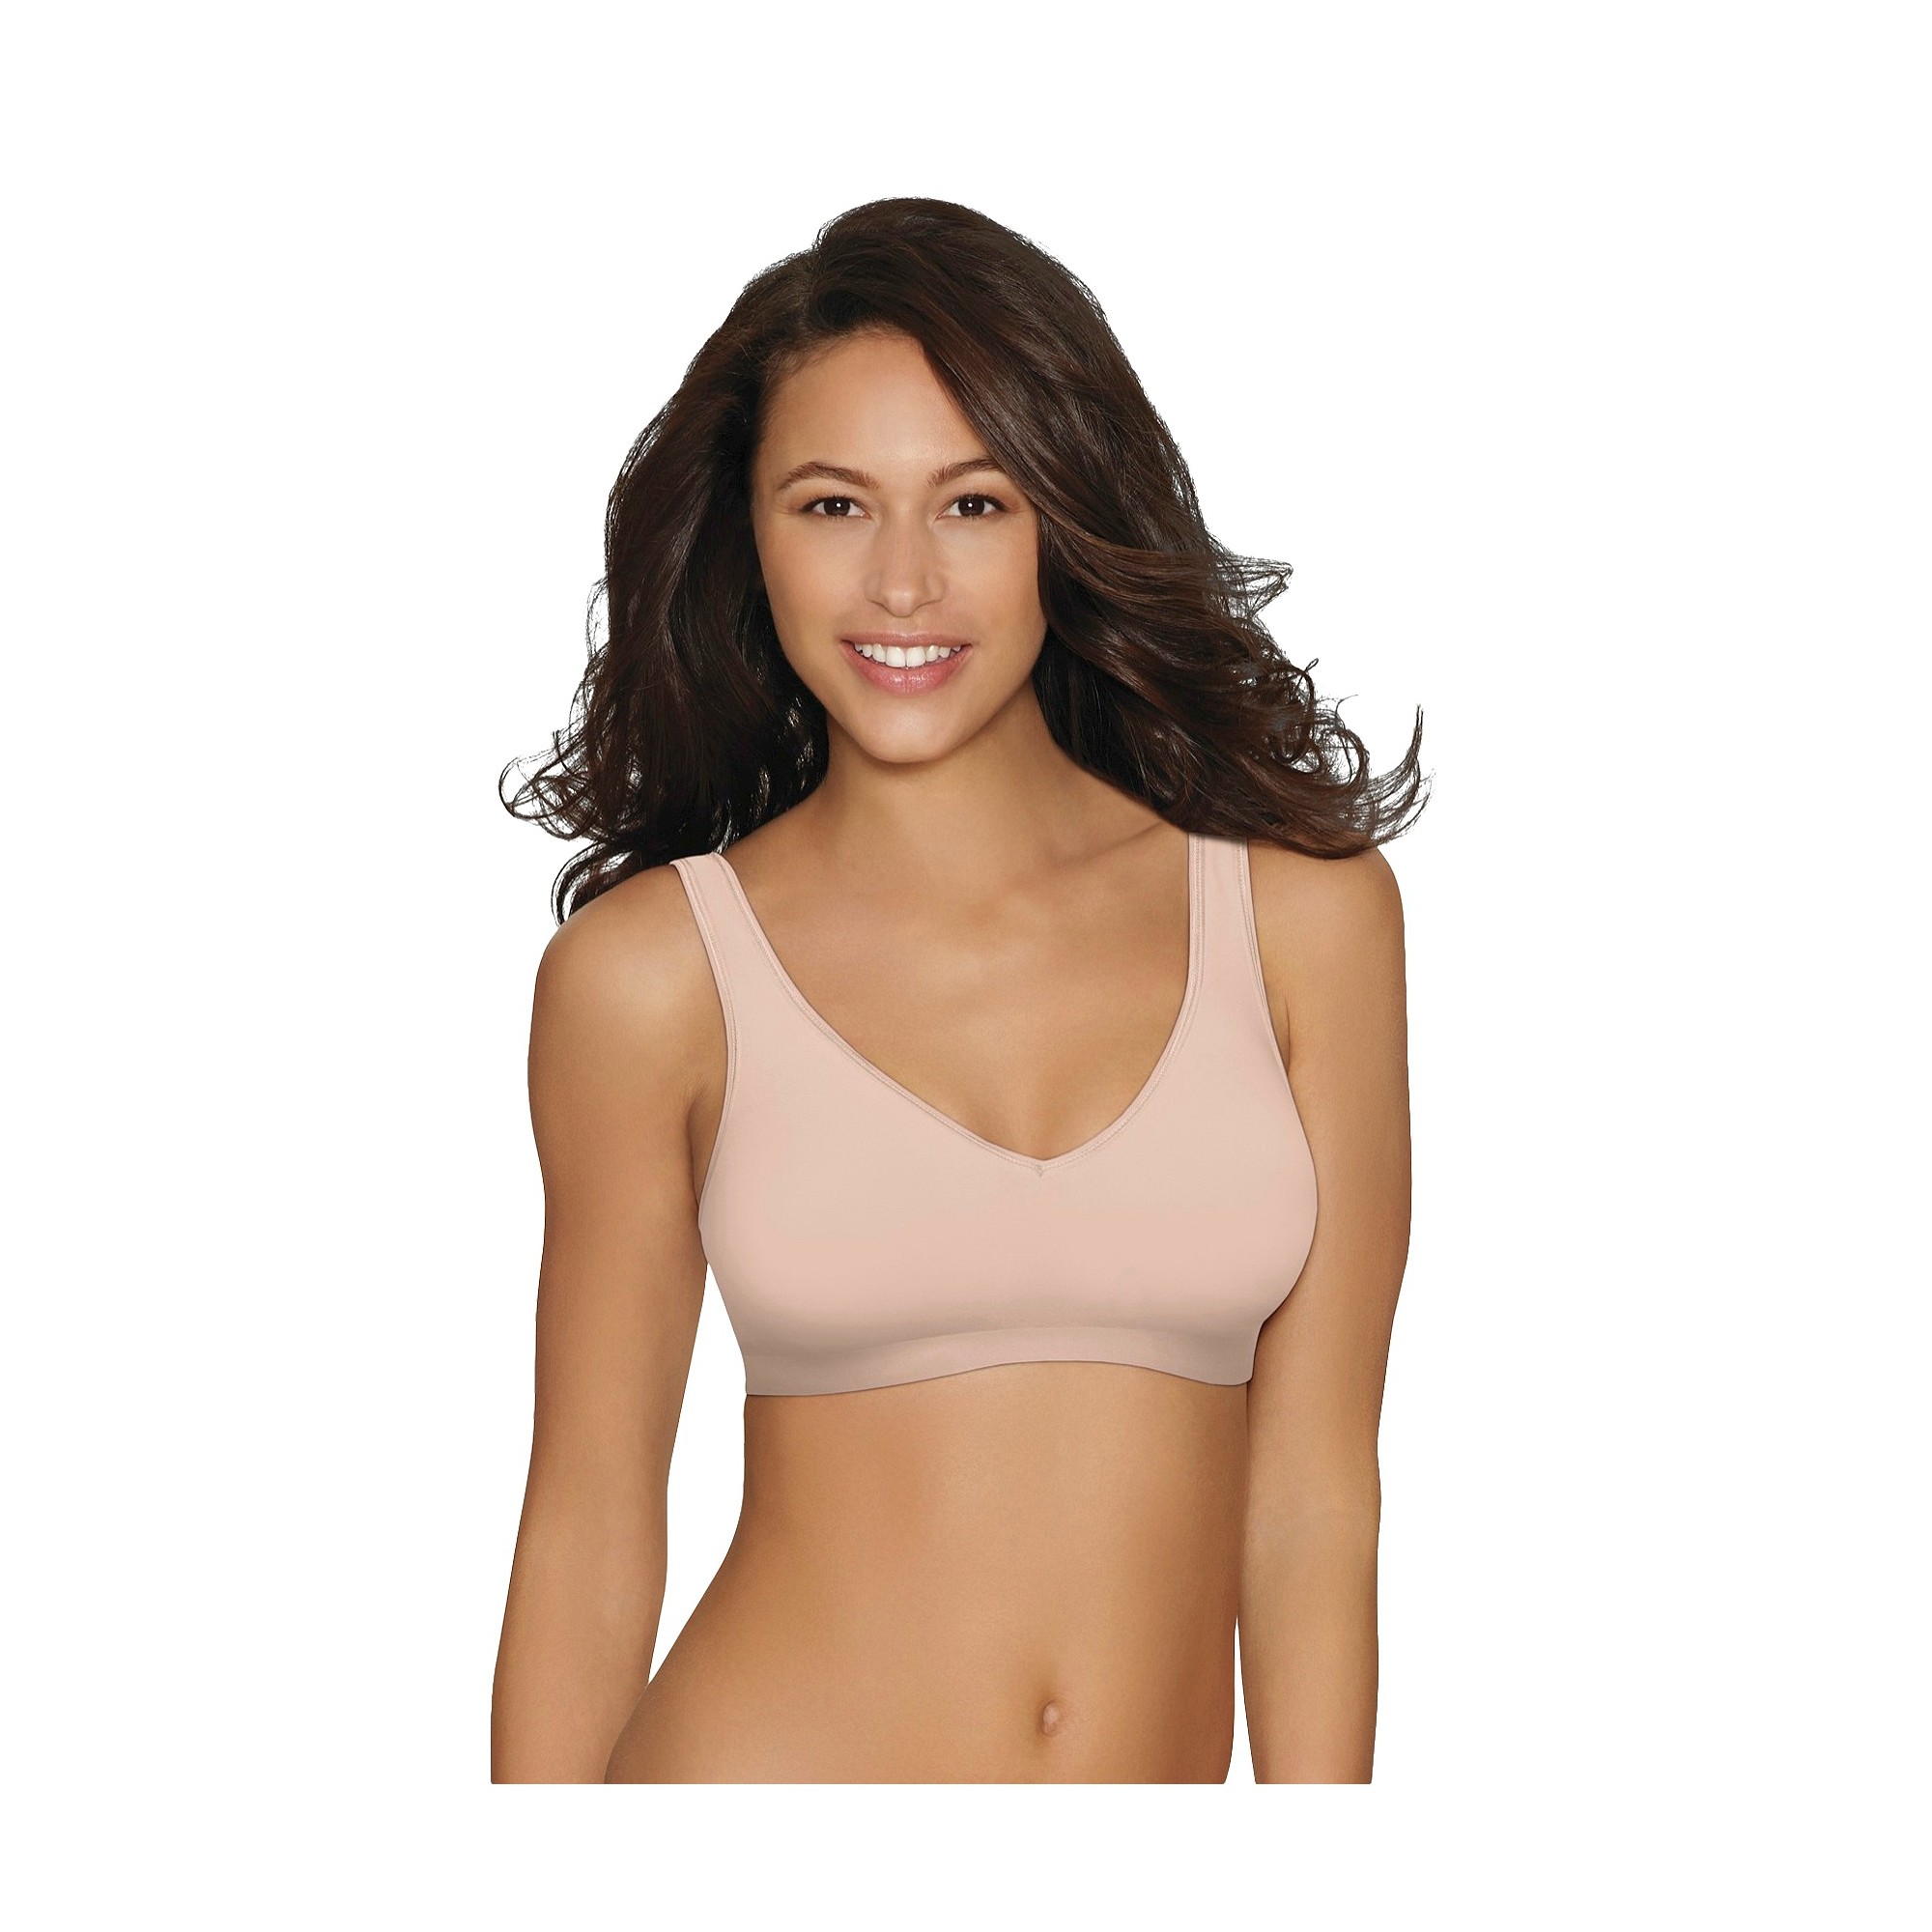 Hanes Women's Full Coverage SmoothTec Band Unlined Wireless Bra G796 - Nude  M, Size: Medium, by Hanes